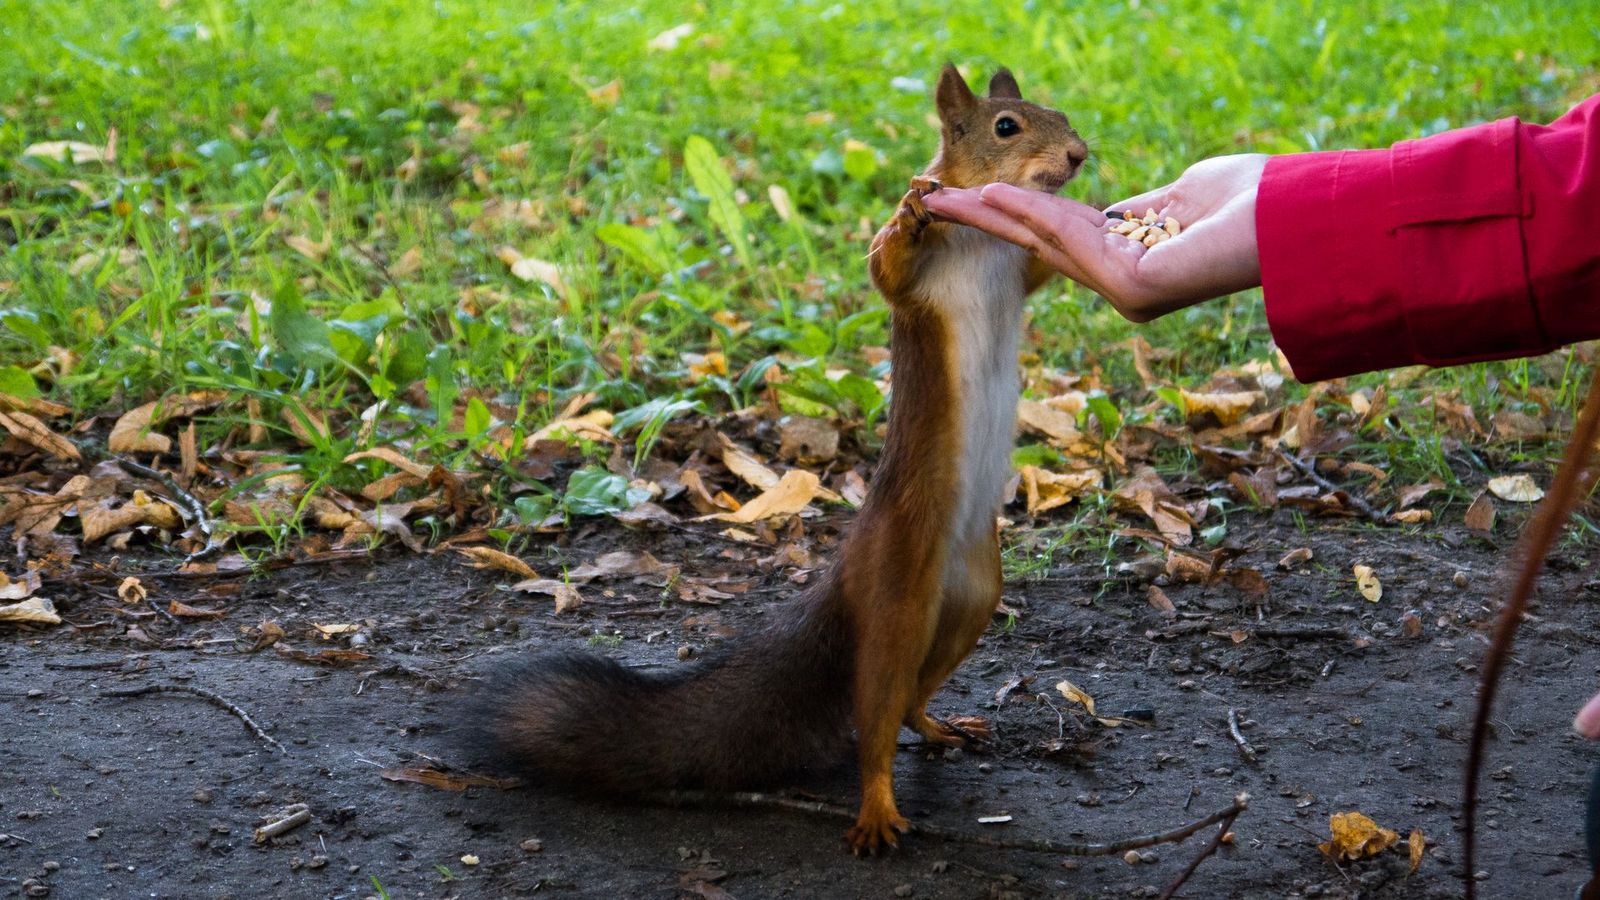 Who said squirrels don't dance? - My, Squirrel, Autumn, Funny, Friday